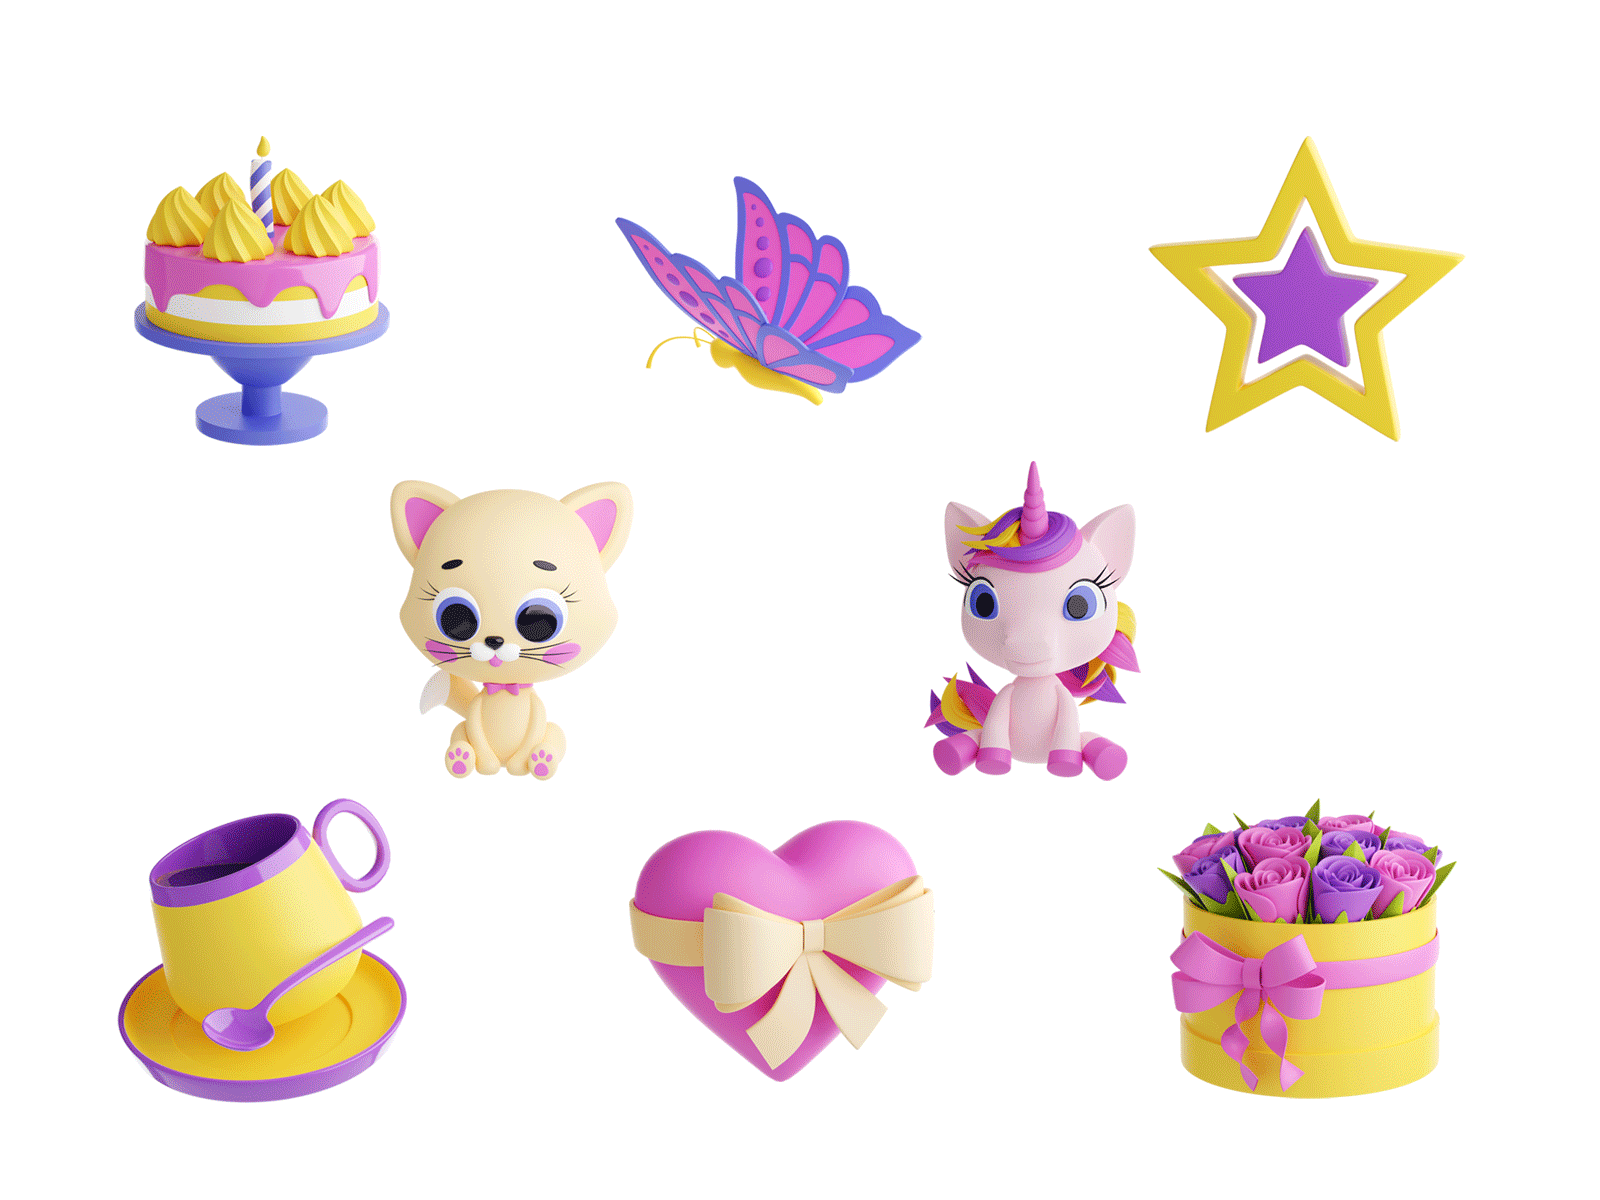 3D illustrations: Gifts collection 3d 3d art birthday blender bow butterfly cake coffee design flower gift graphic design heart icon illustration kitten present rose star unicorn